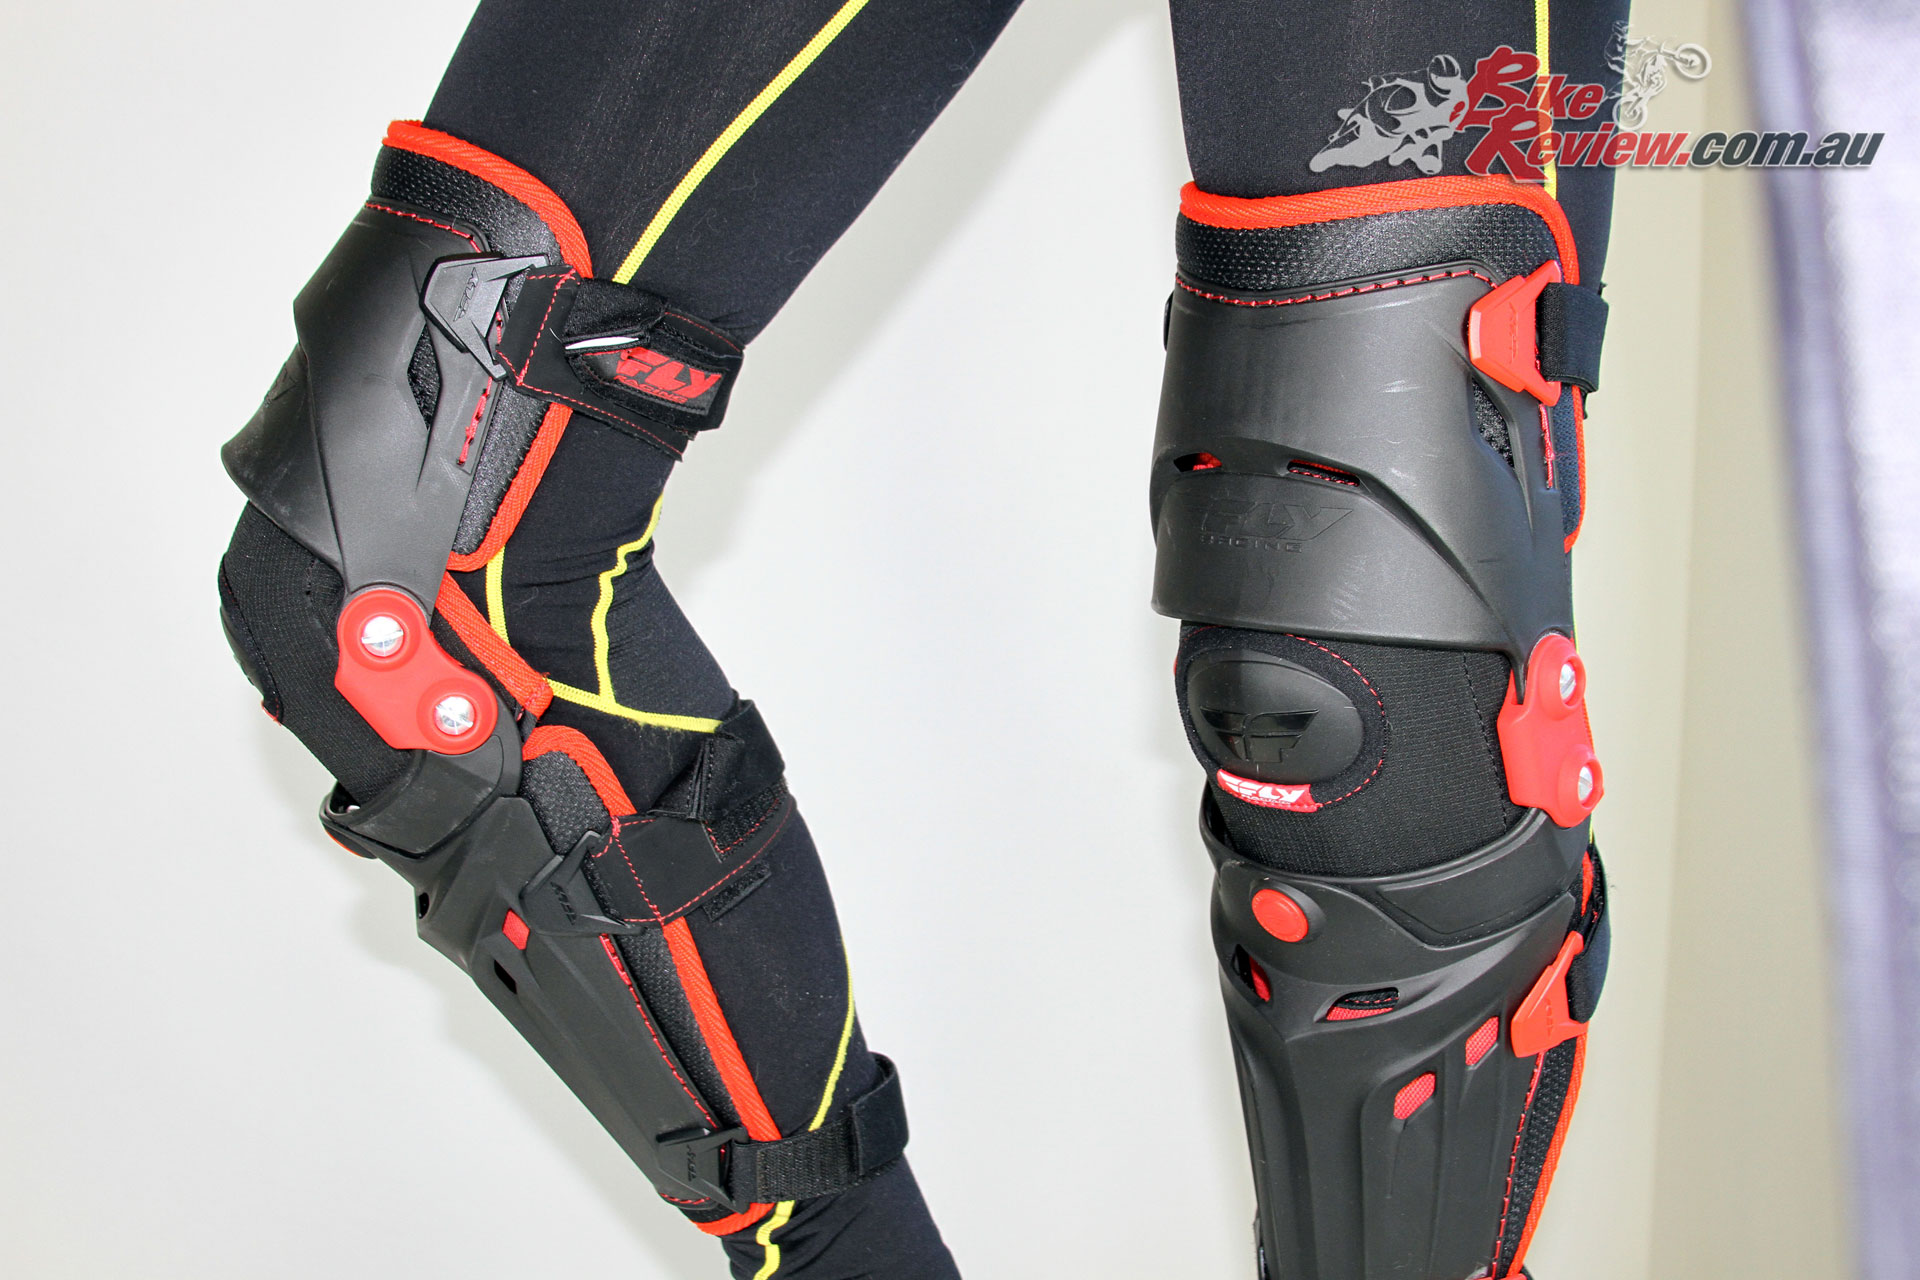 Gear Review: Fly Racing 5 Pivot Knee Guard System - Review